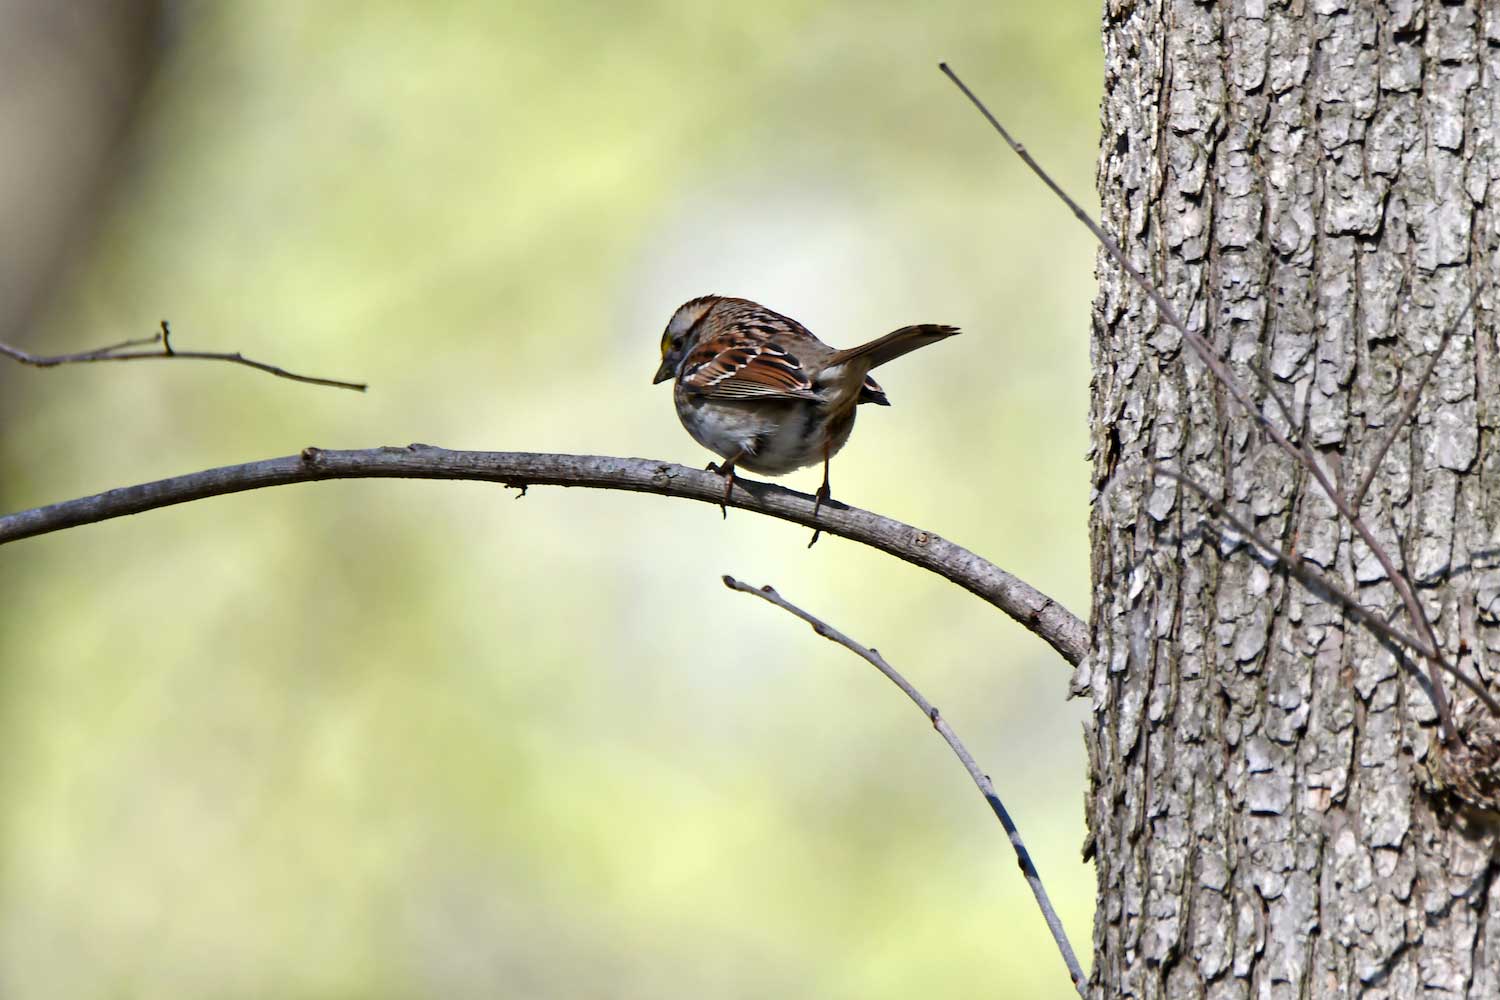 A white-throated sparrow perched on a tree branch.